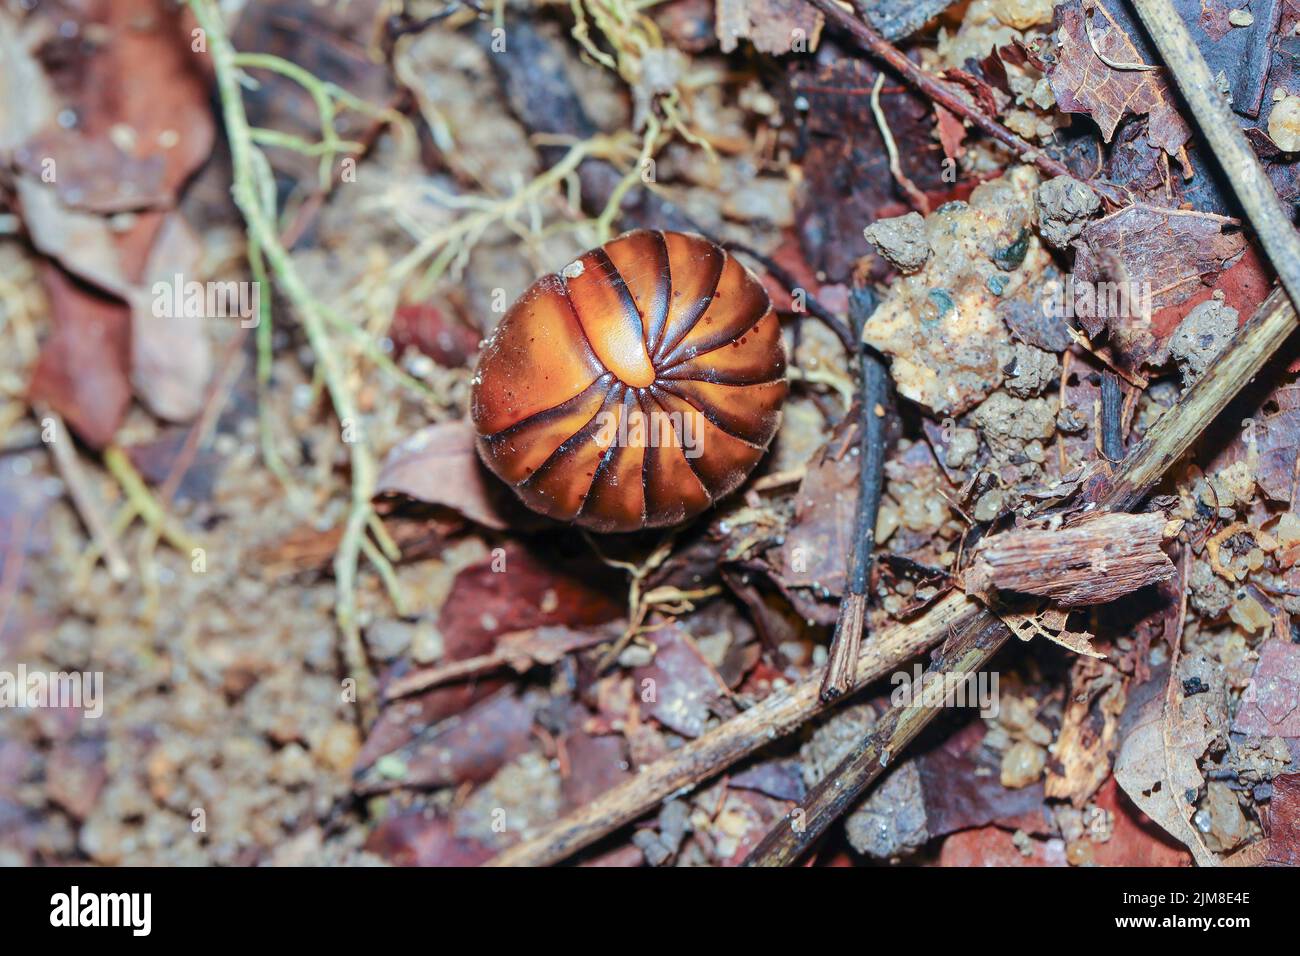 Rolled up pill millipede, Oniscomorpha, in the shape of a hard ball Stock Photo